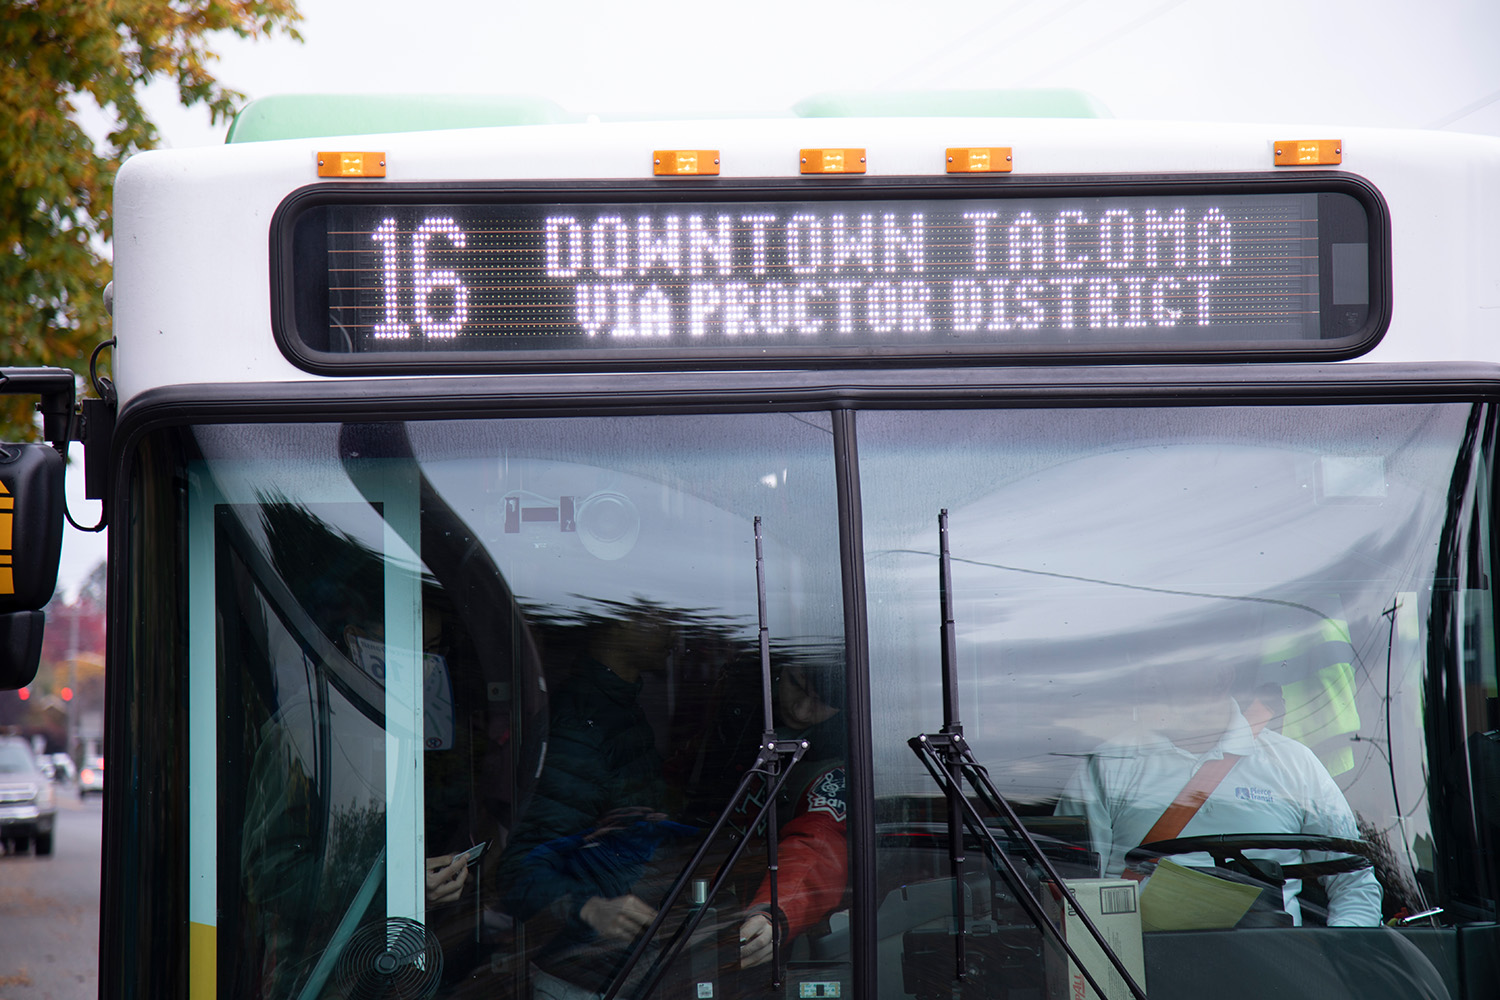 The front of a Pierce Transit bus. There is a glare on the windshield but the driver is partially visible. There is text on the bus reader board that says "16 Downtown Tacoma via Proctor District"